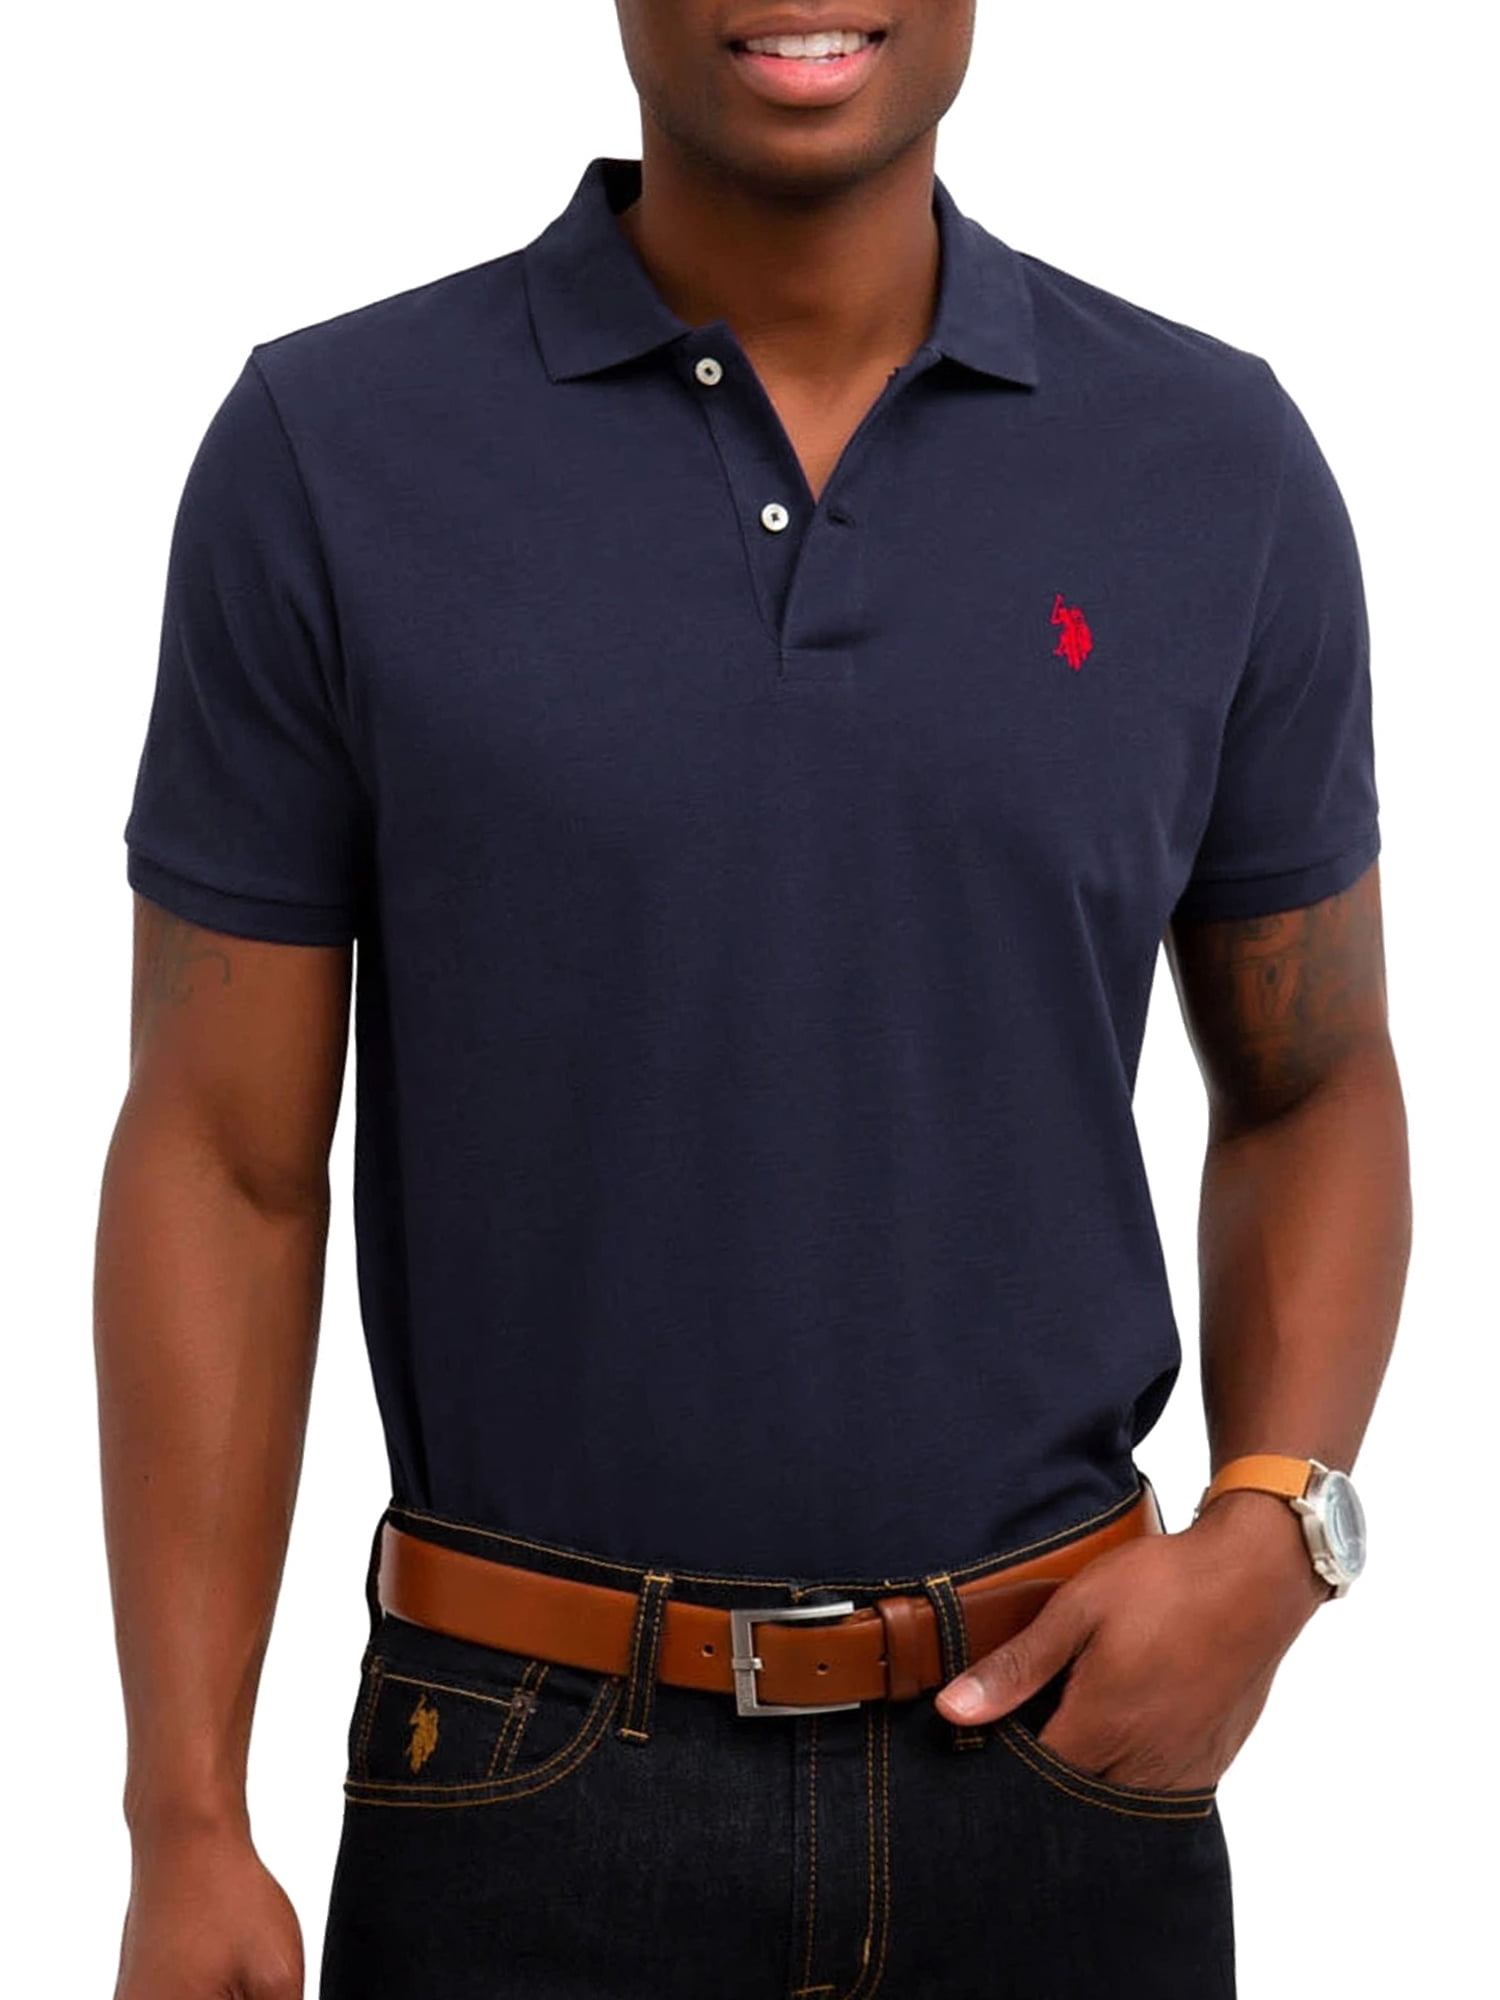 US Polo Assn. Short Sleeve Relaxed Fit Cotton Polo (Men's) 1 Pack ...